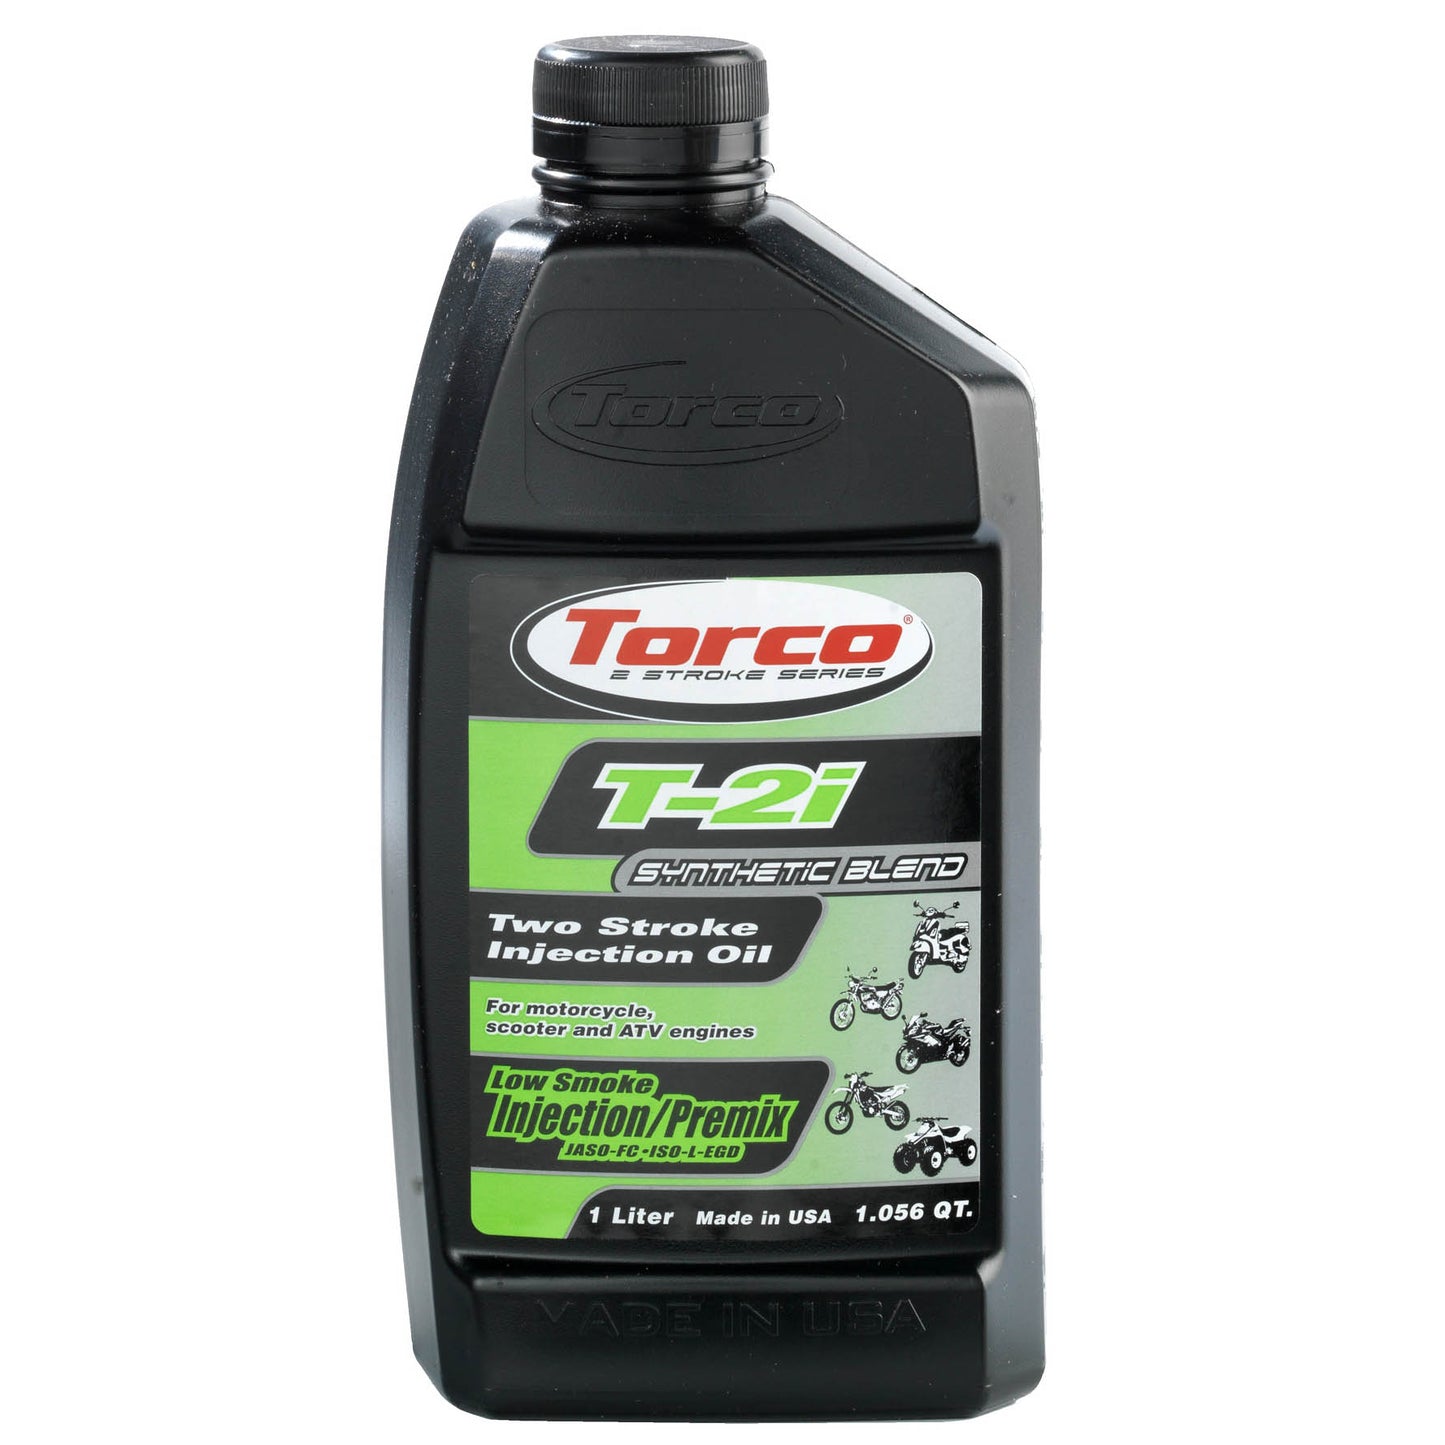 T-2i 2 Stroke Injection Oil by torco